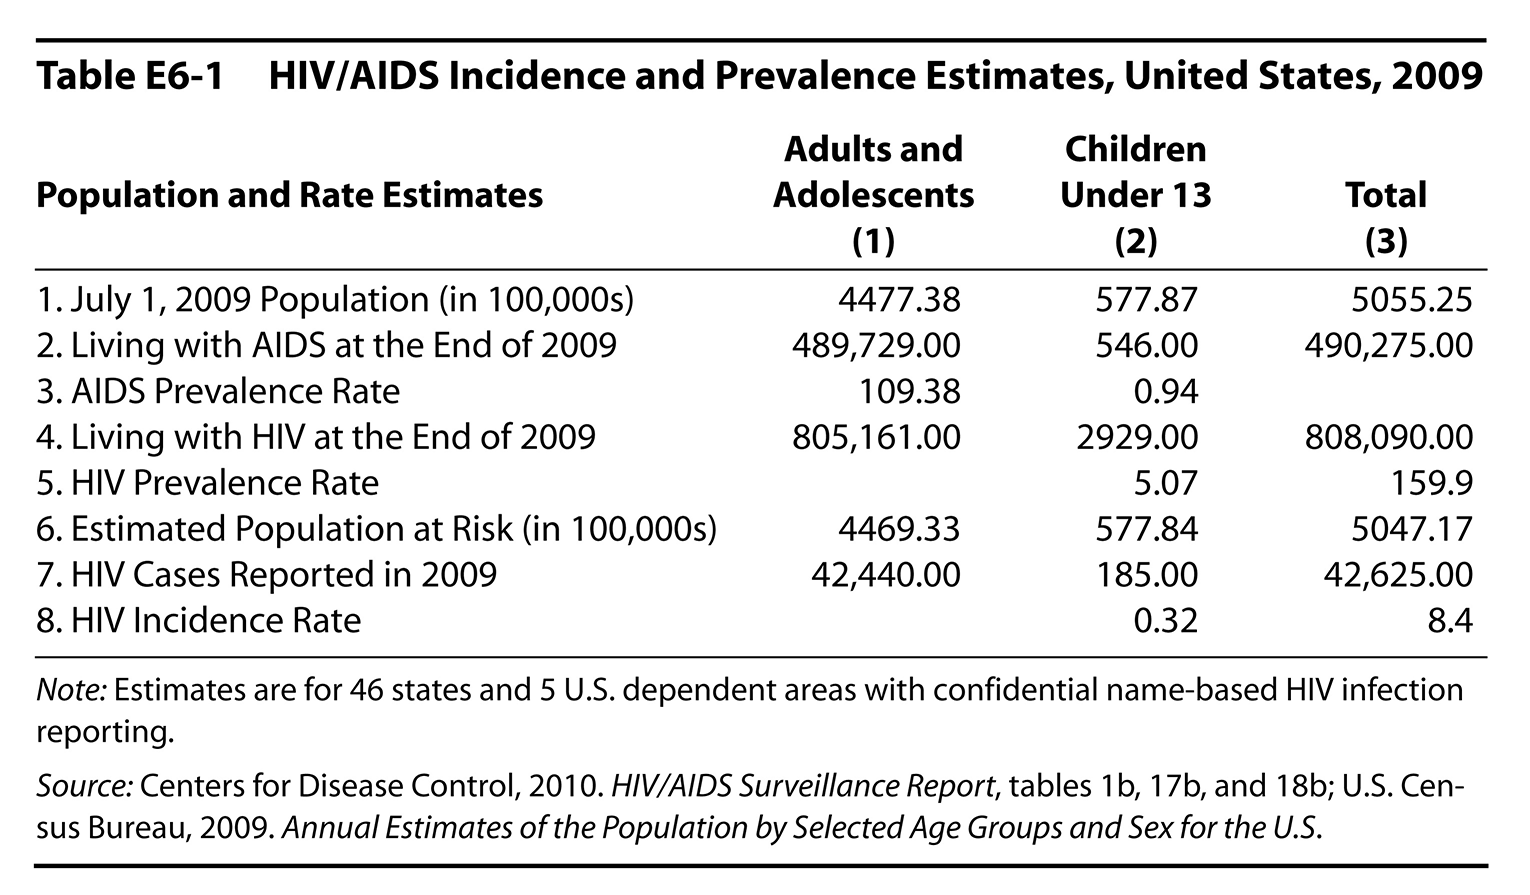 Table for HIV/AIDS Incidence and Prevalence Estimates, United States, 2009